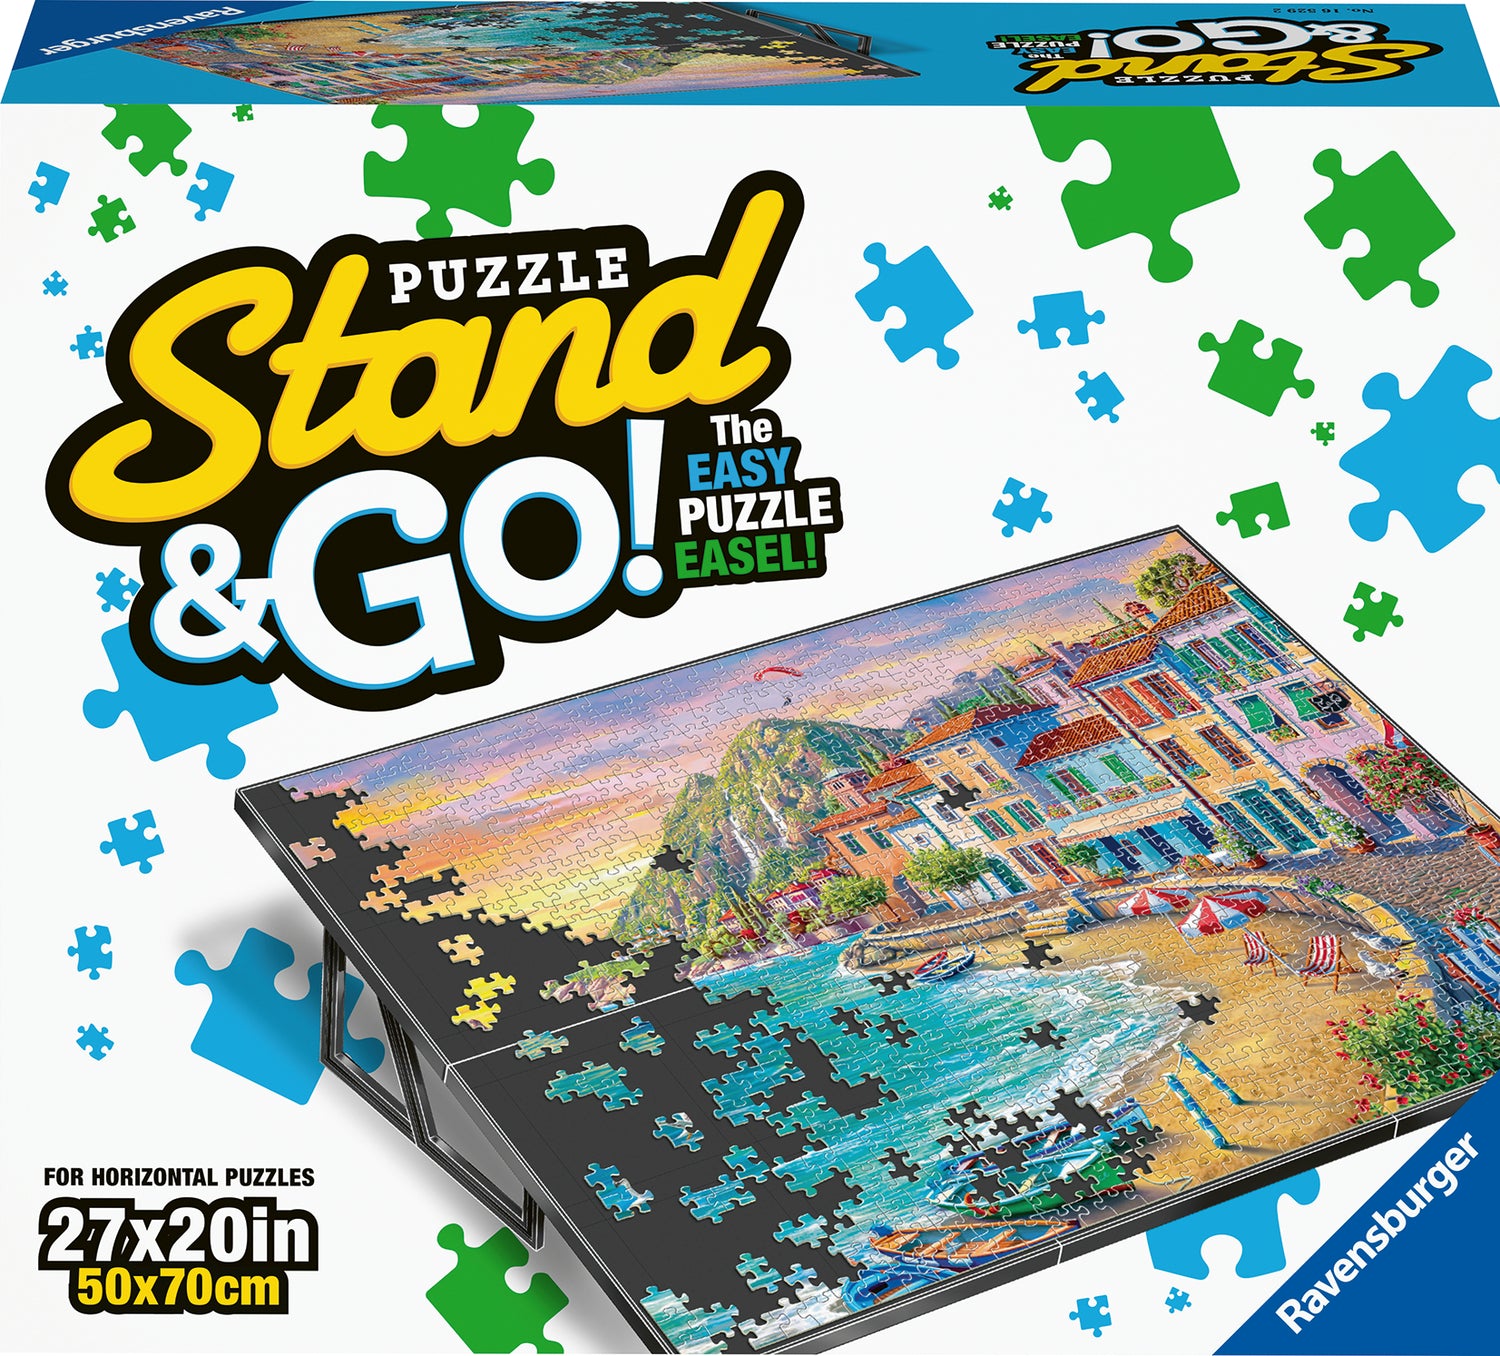 Puzzle Stand  Go